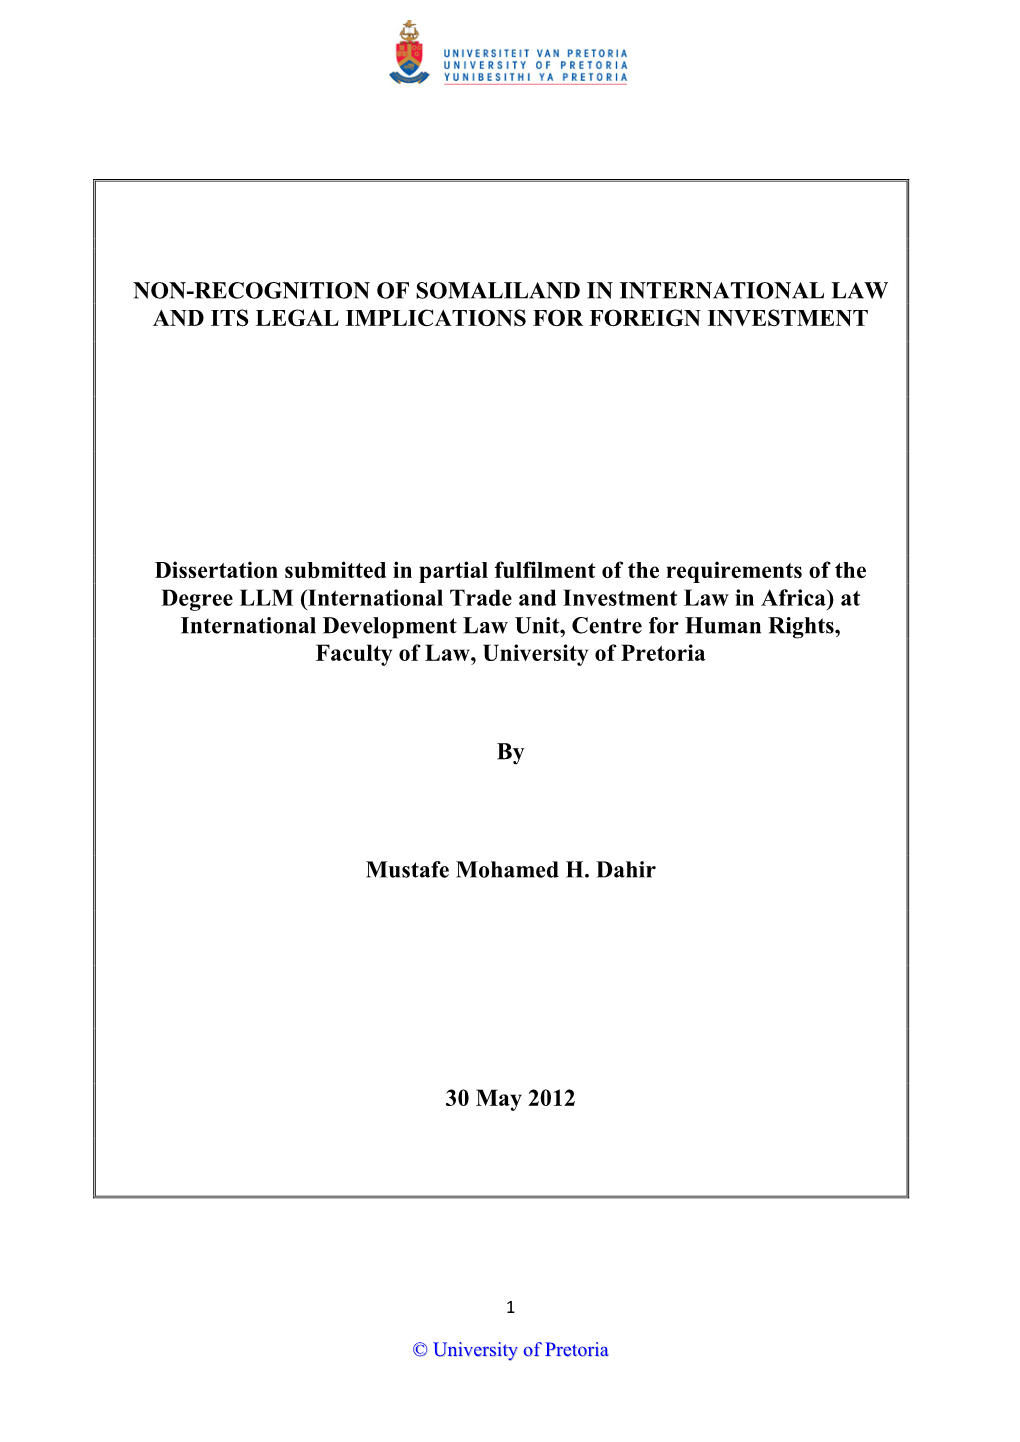 Non-Recognition of Somaliland in International Law and Its Legal Implications for Foreign Investment